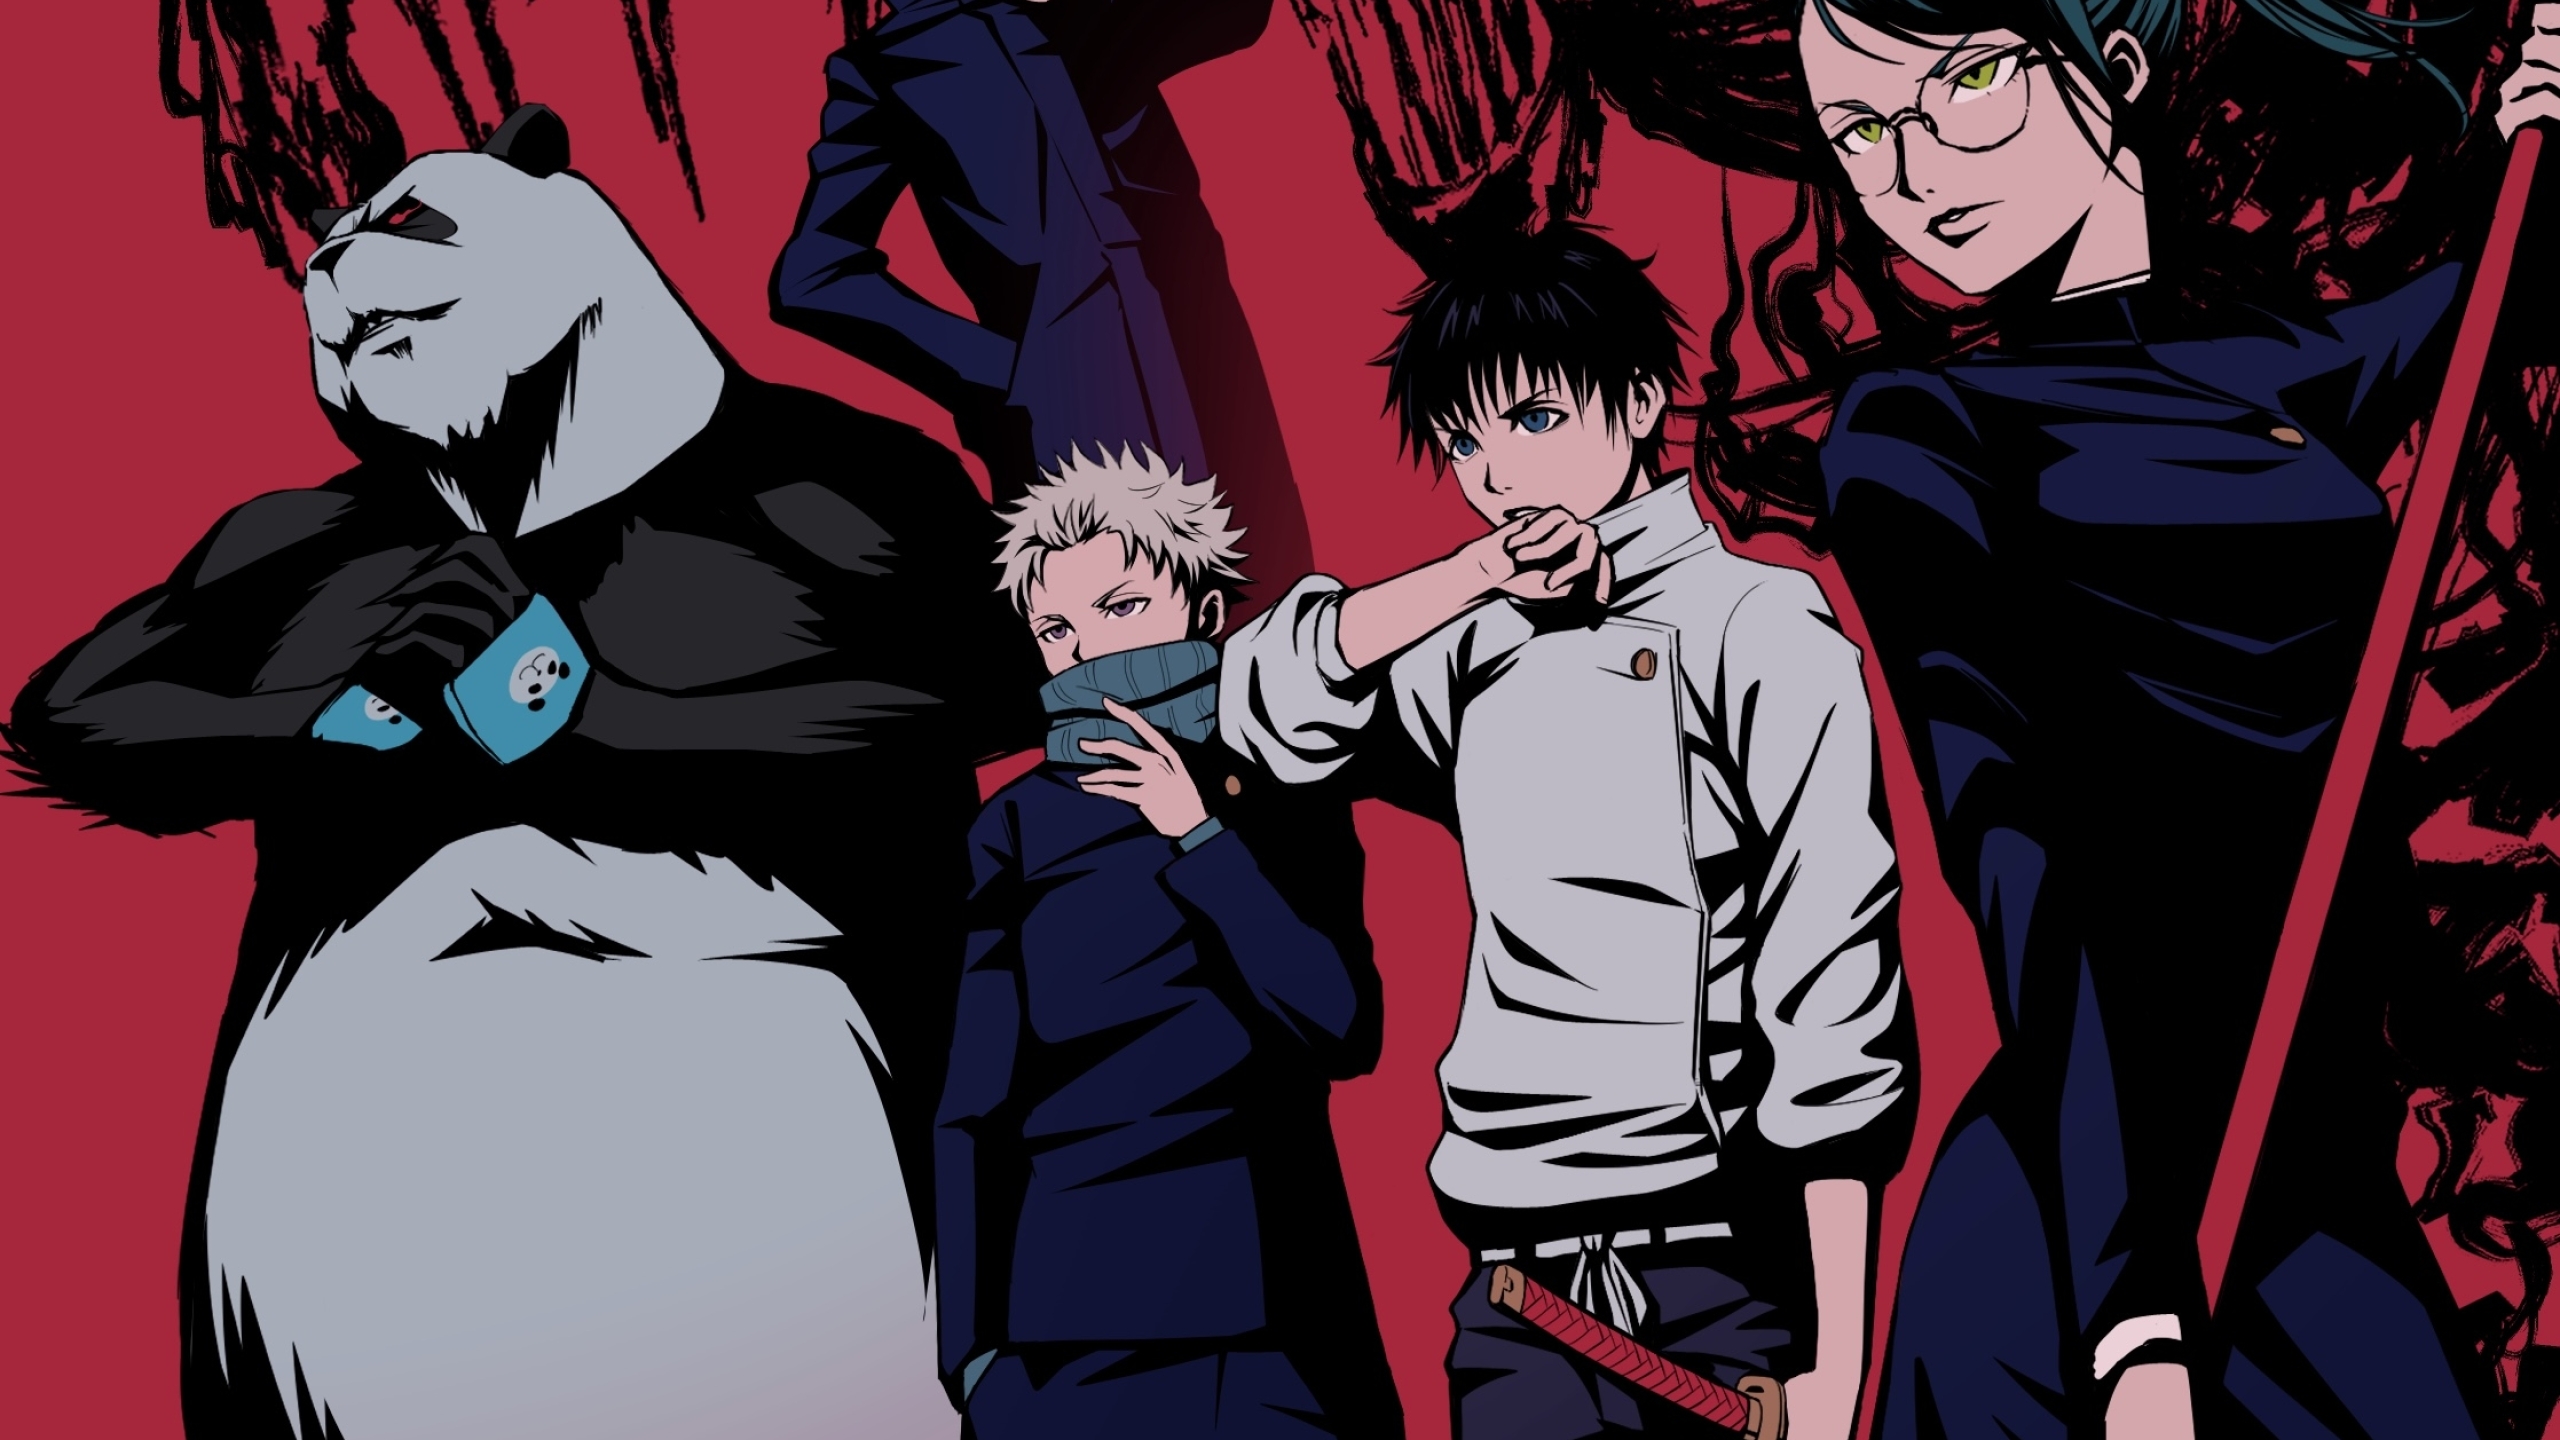 1500+ Jujutsu Kaisen HD Wallpapers and Backgrounds